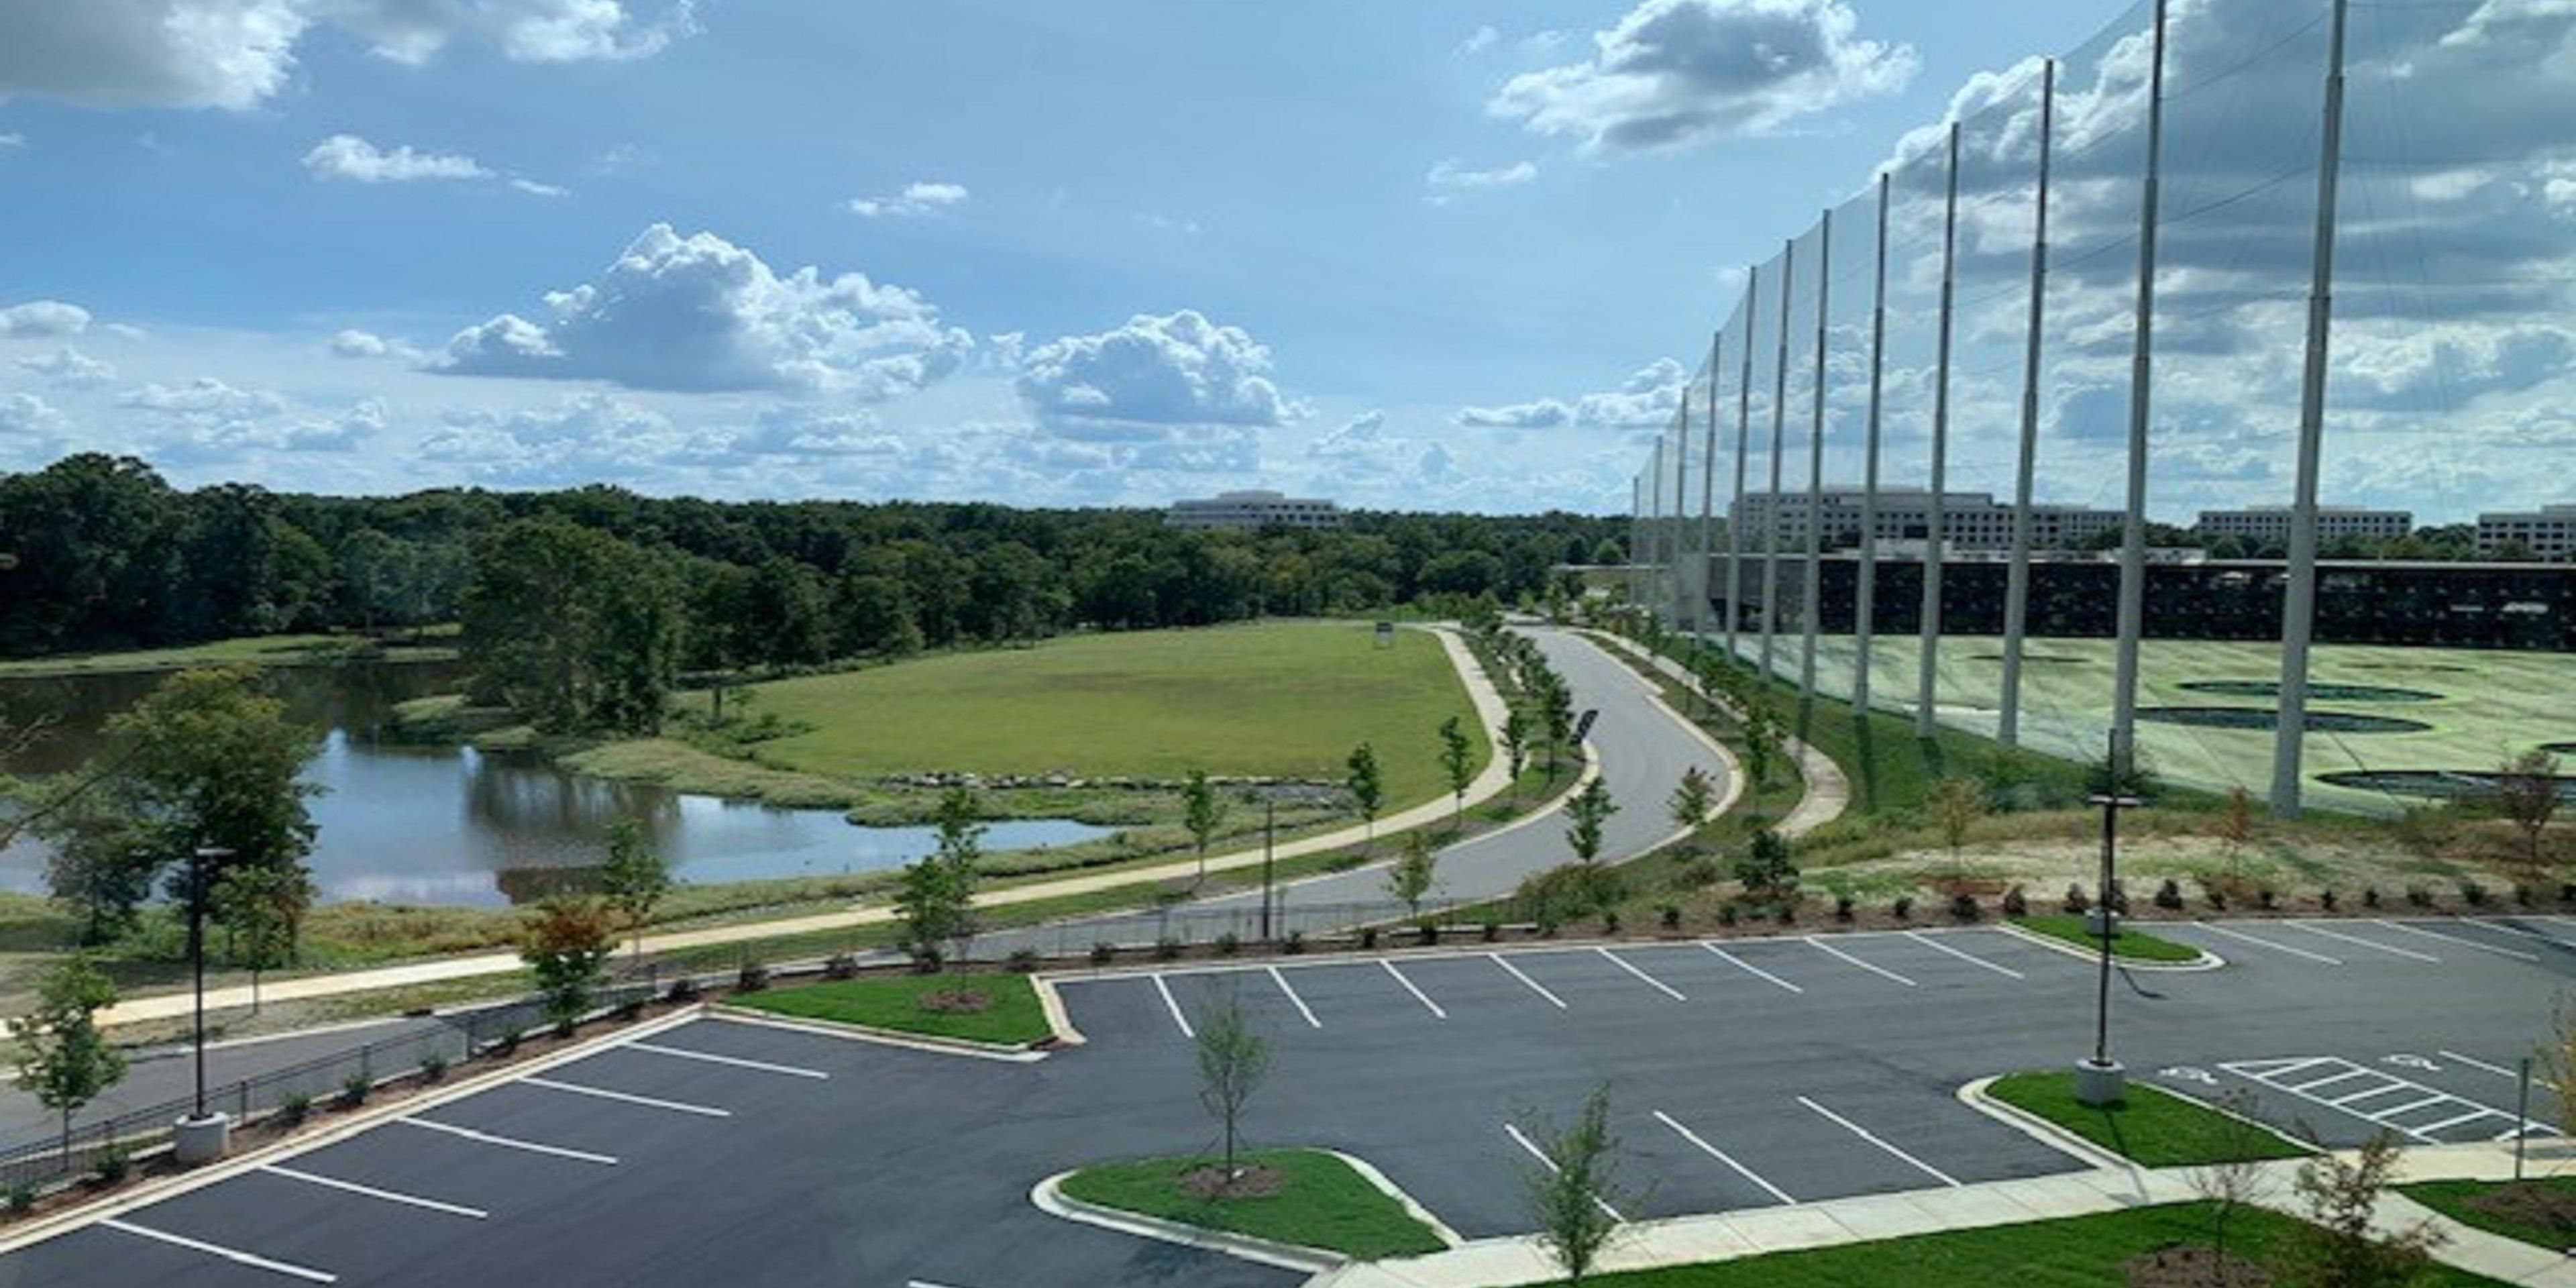 Our hotel is within walking distance to TopGolf, your premier entertainment destination. Enjoy a couple of hours of golf, then come back and relax at our new hotel.
